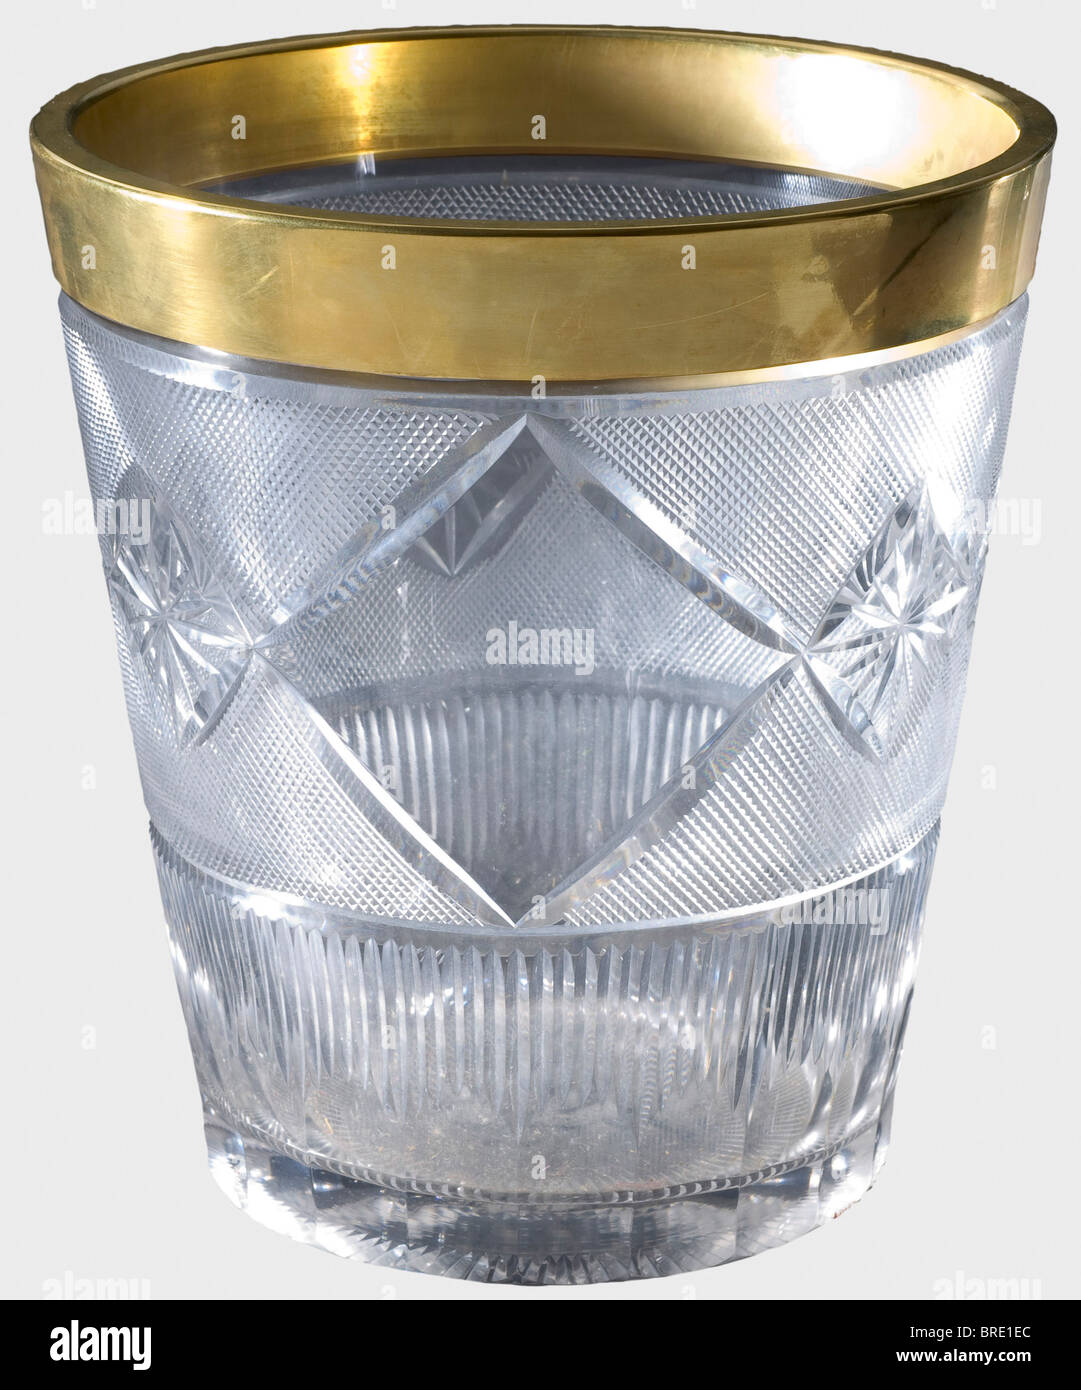 A Russian crystal glass Champagne cooler, circa 1890 Crystal glass with ground designs and diamond-cut walls. Gilded rim. Height 21.5 cm. Diameter 19.5 cm. Provenance: Grand Duchess Vera Konstantinovna Romanova (1854 - 1912). historic, historical, 19th century, vessel, vessels, object, objects, stills, clipping, clippings, cut out, cut-out, cut-outs, Stock Photo